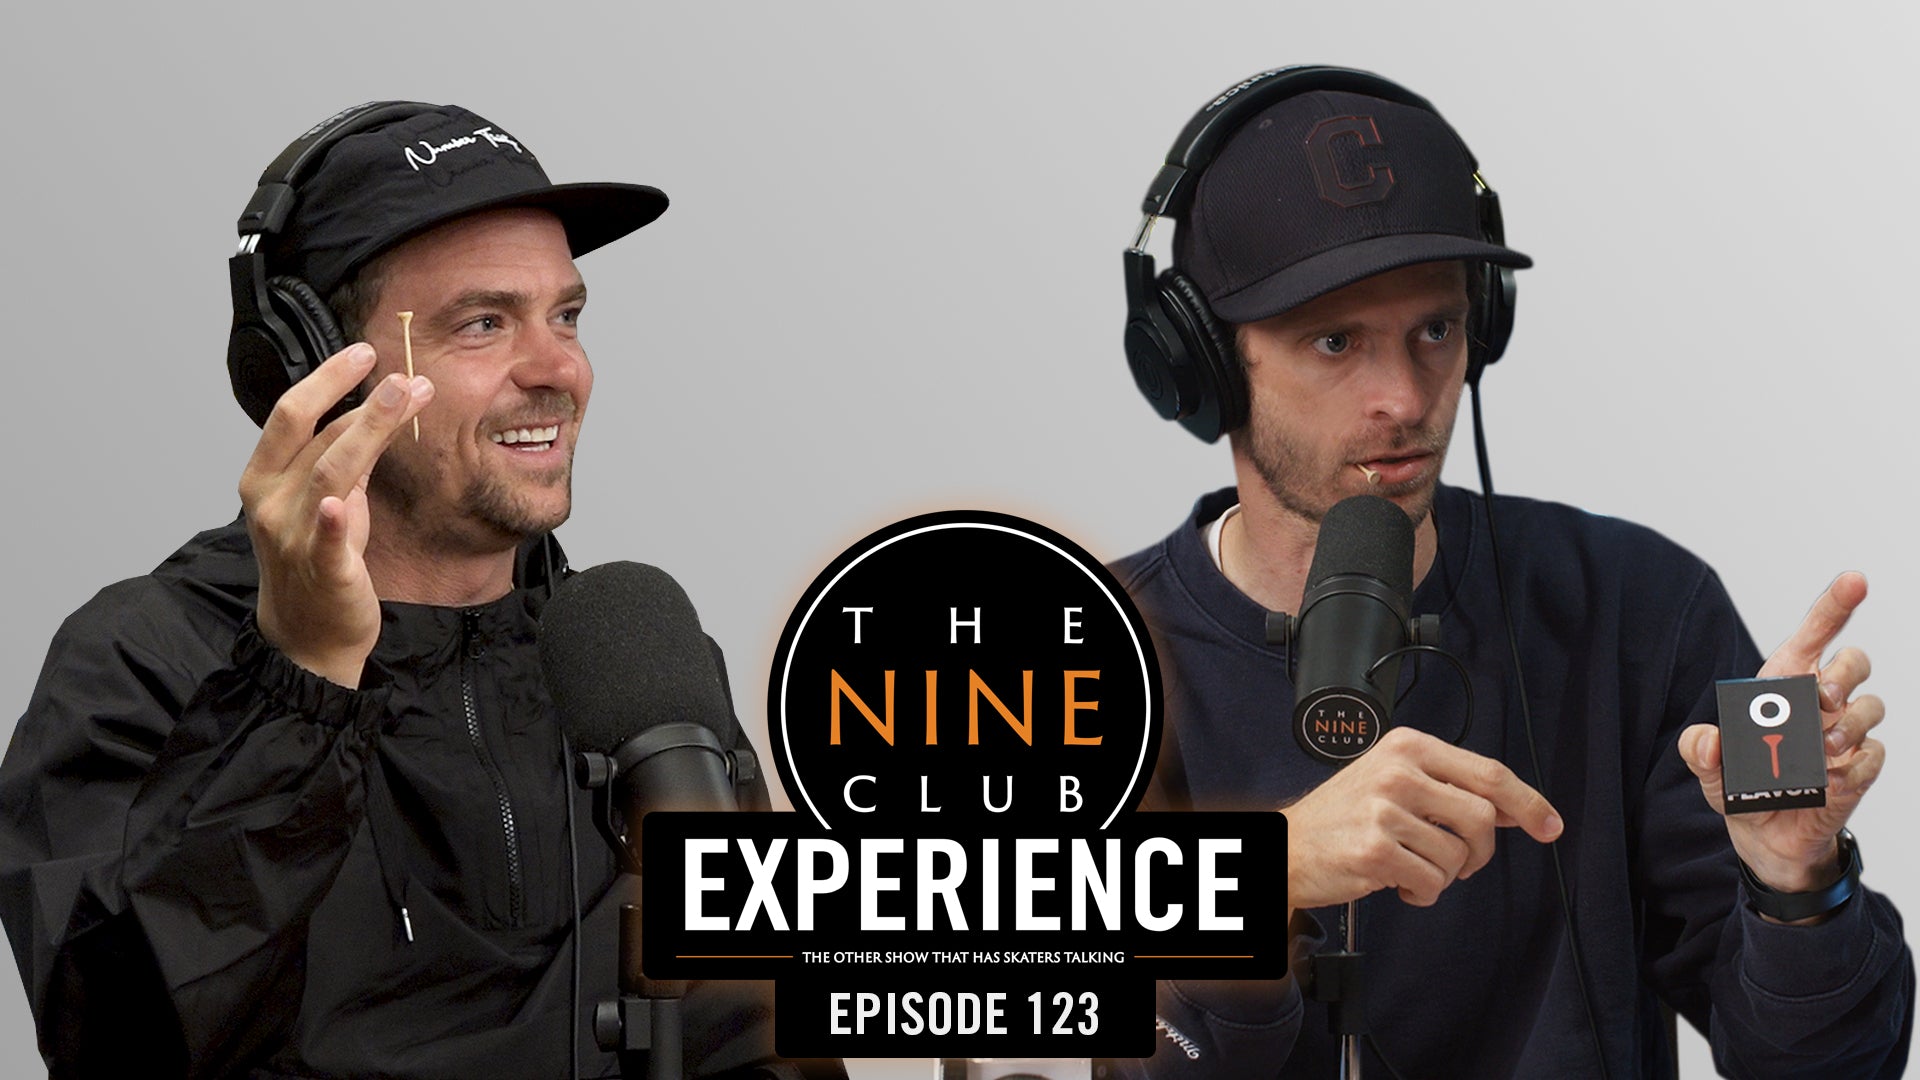 The Nine Club Experience Episode 123